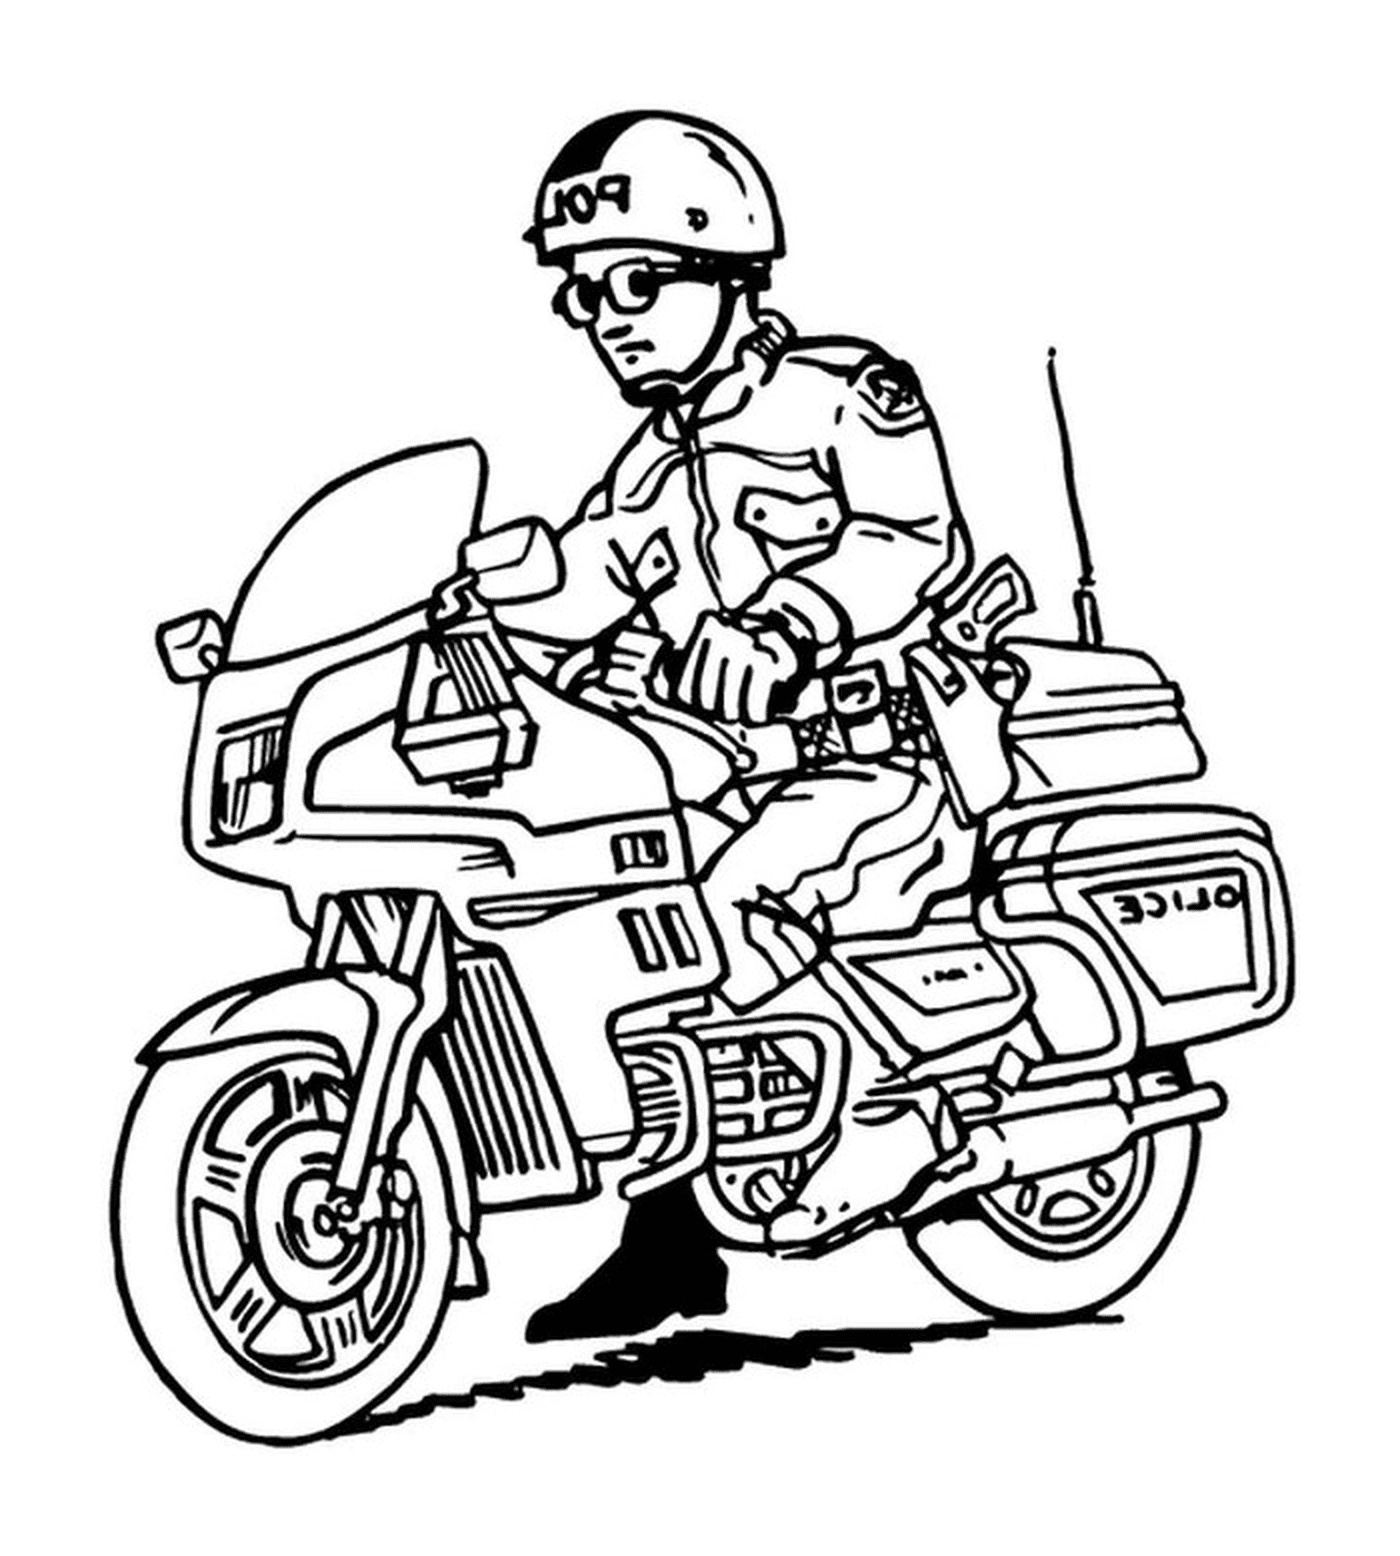  Easy motorcycle policeman 